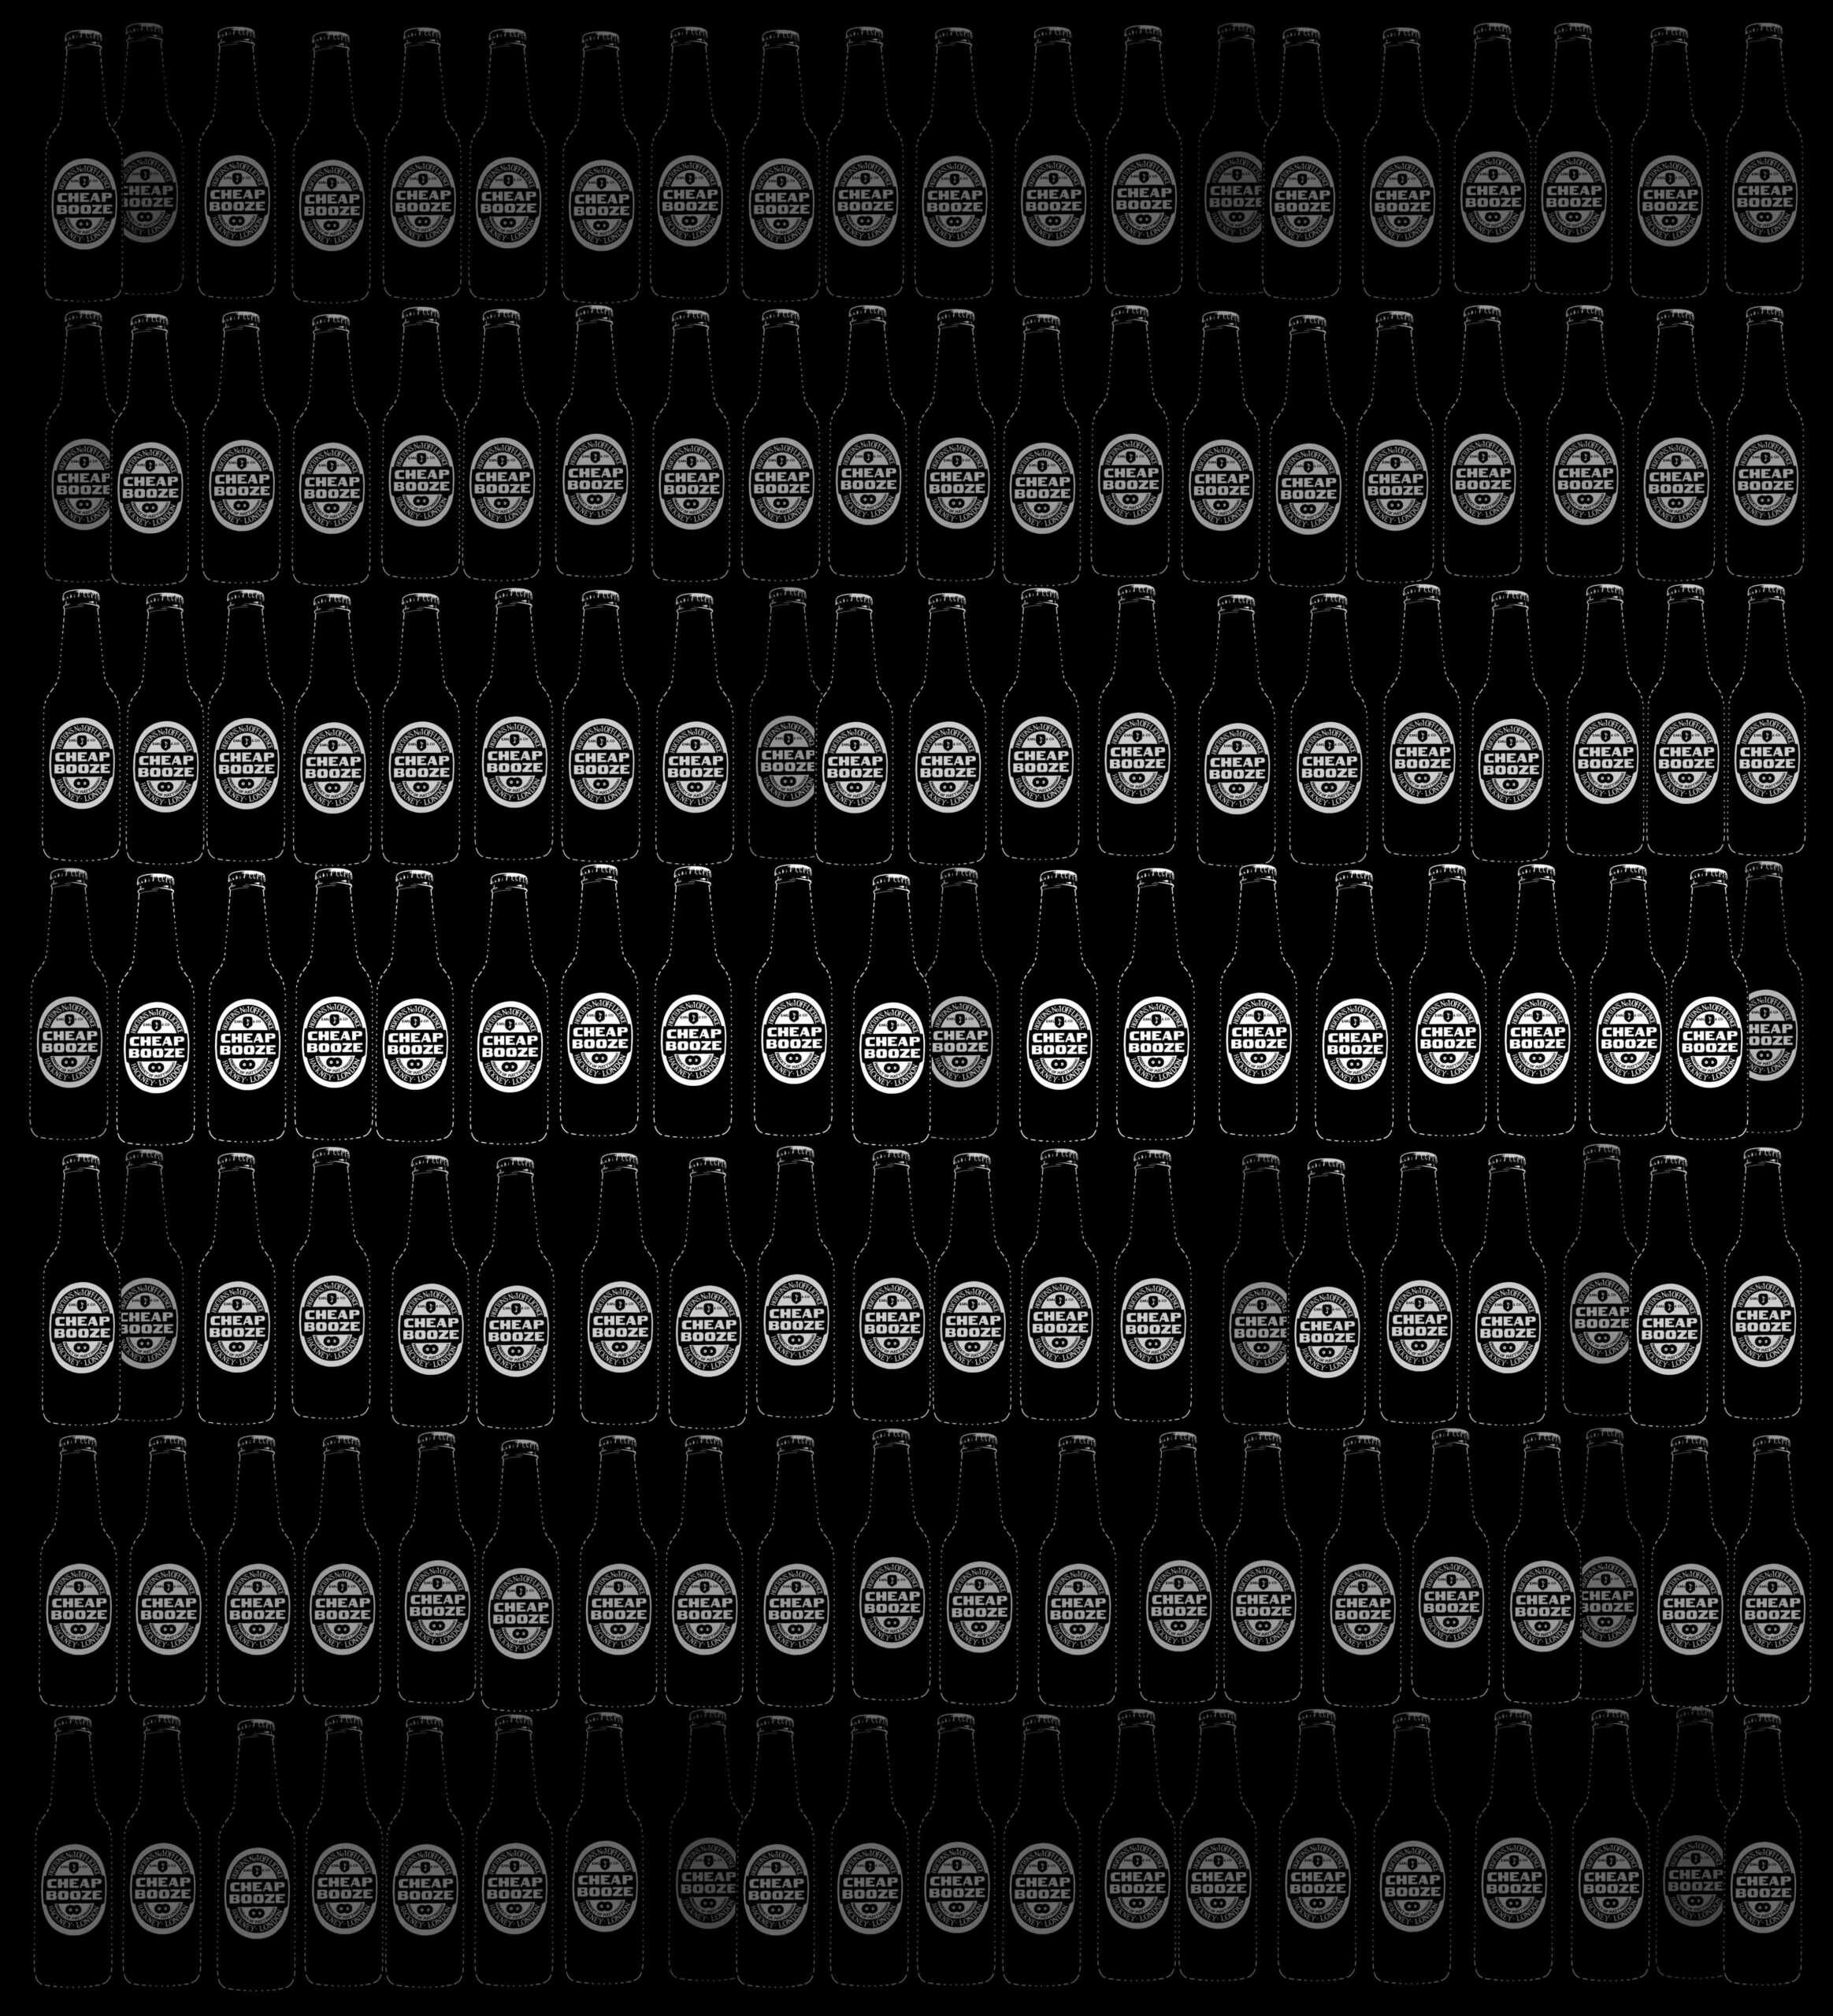 Grid of bottles in Andy Warhol style with added randomisation and gradation
effects.